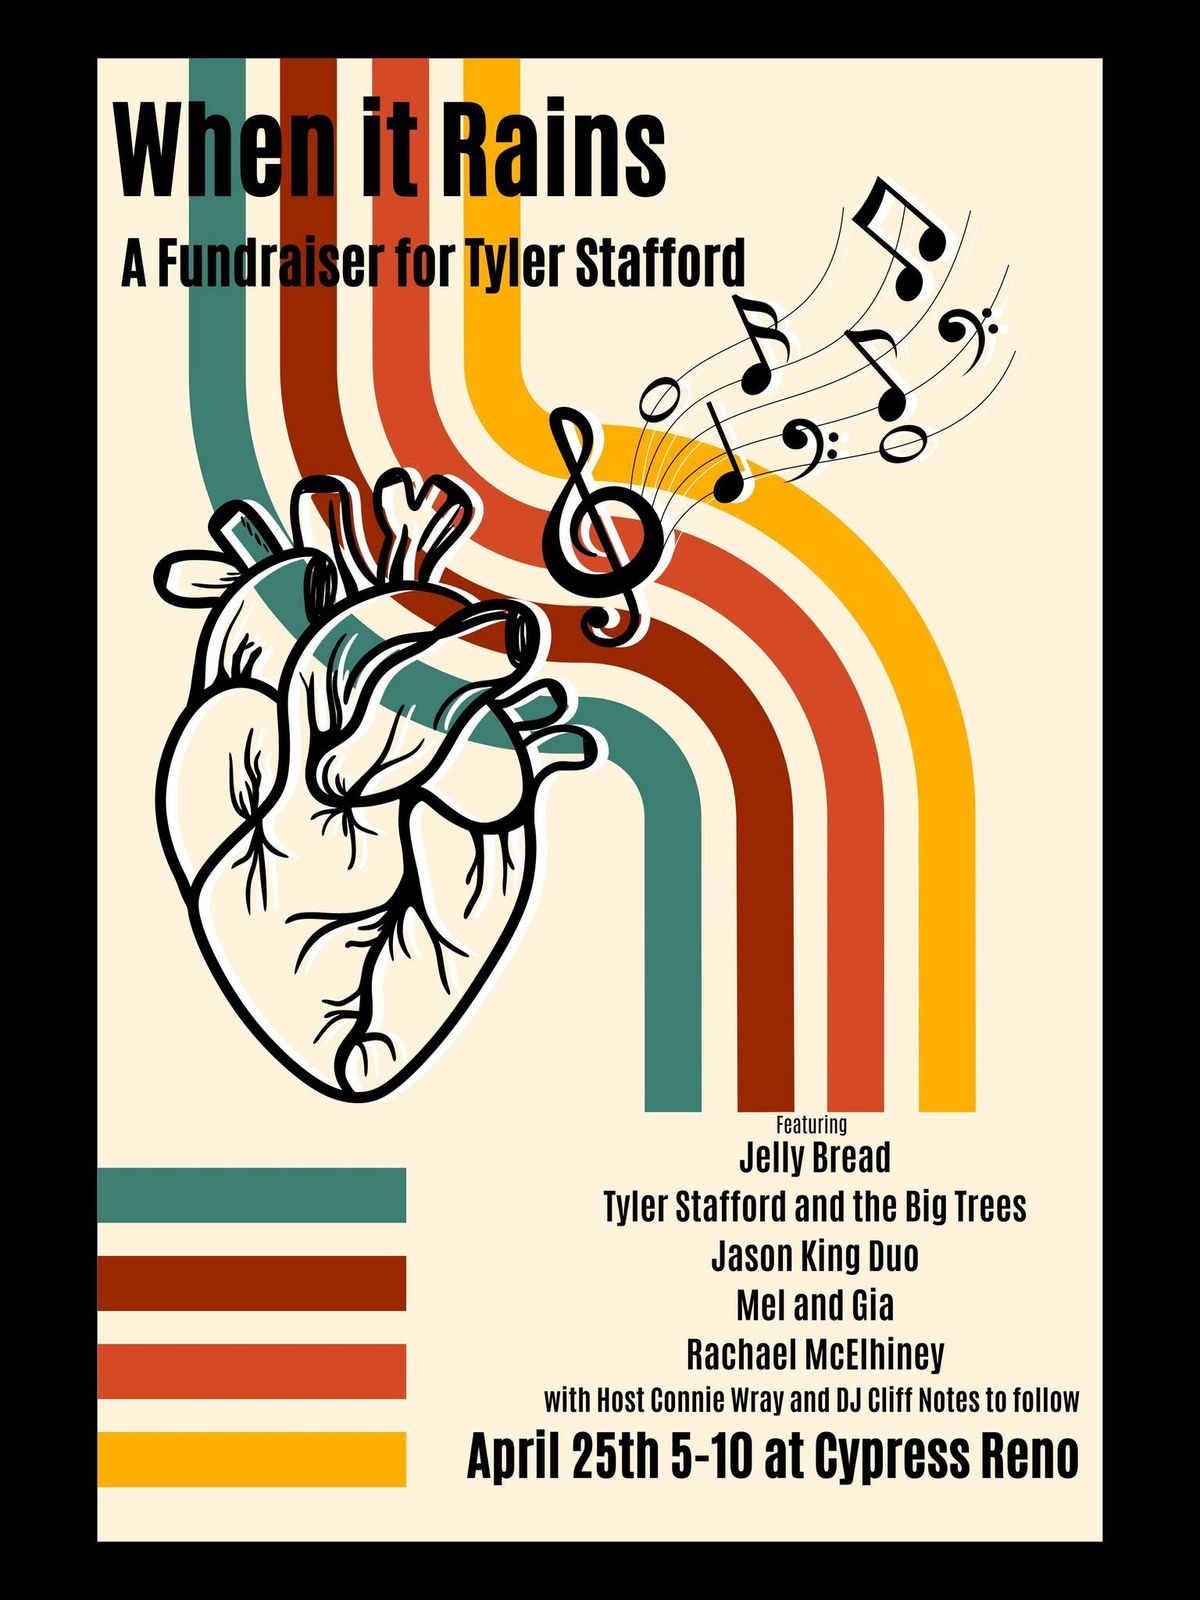 When it Rains - A fundraiser for Tyler Stafford